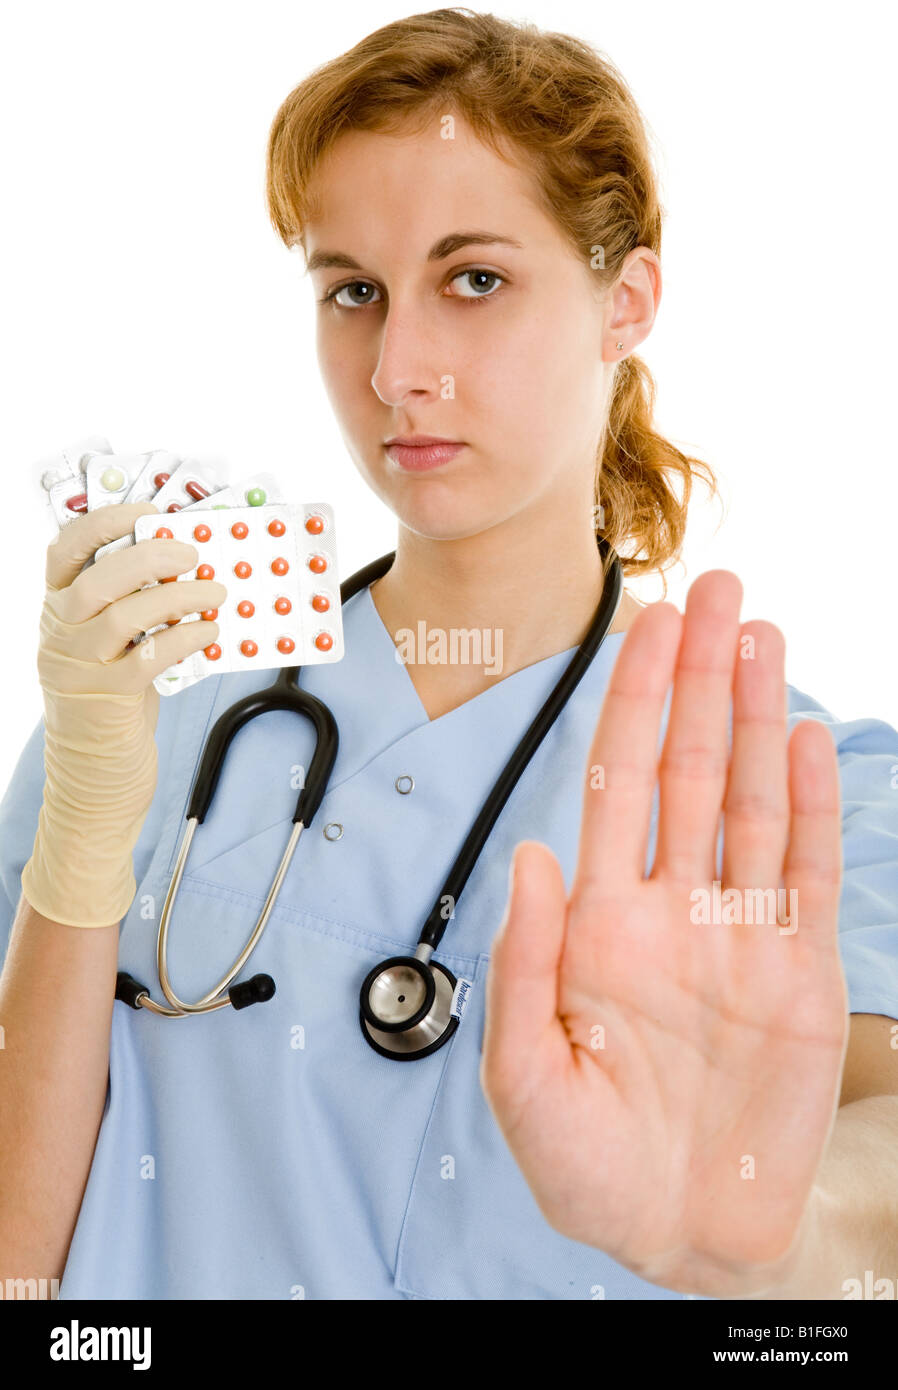 nurse with tablets and warning sign Stock Photo